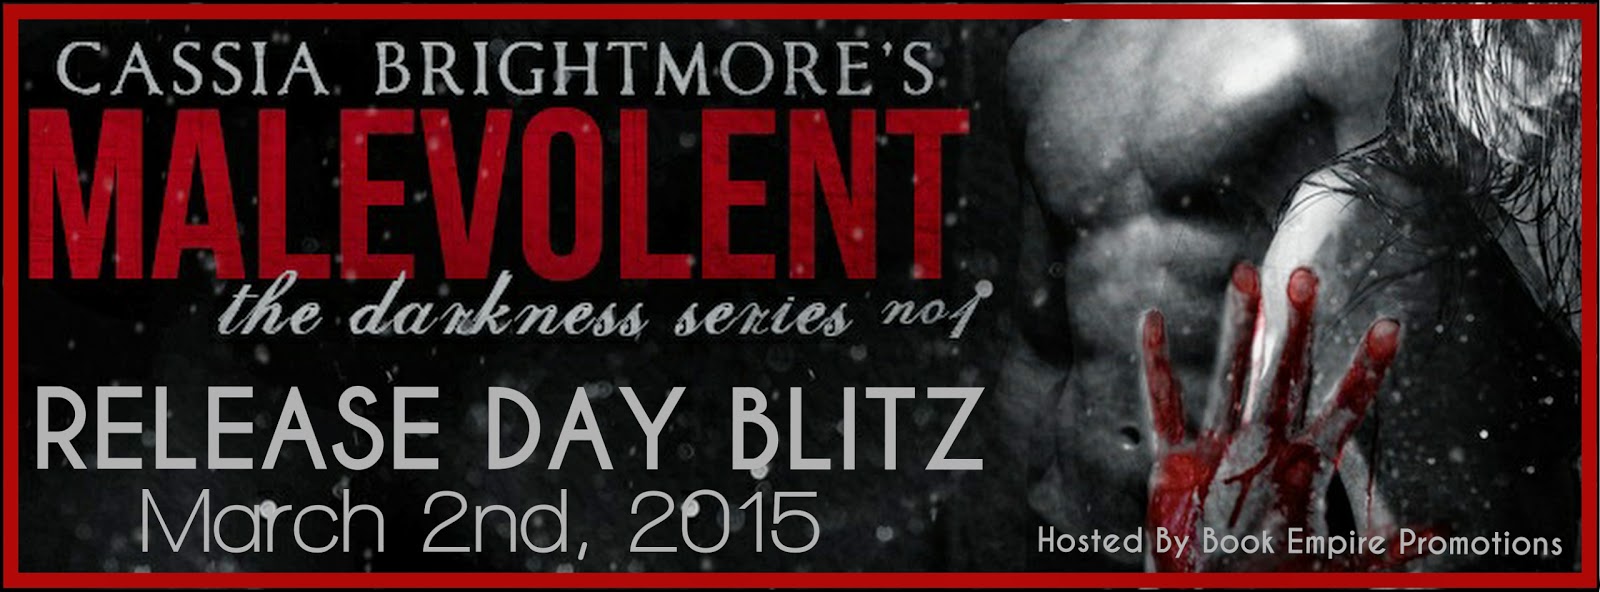 Malevolent by Cassia Brightmore Release Day Blitz + Giveaway